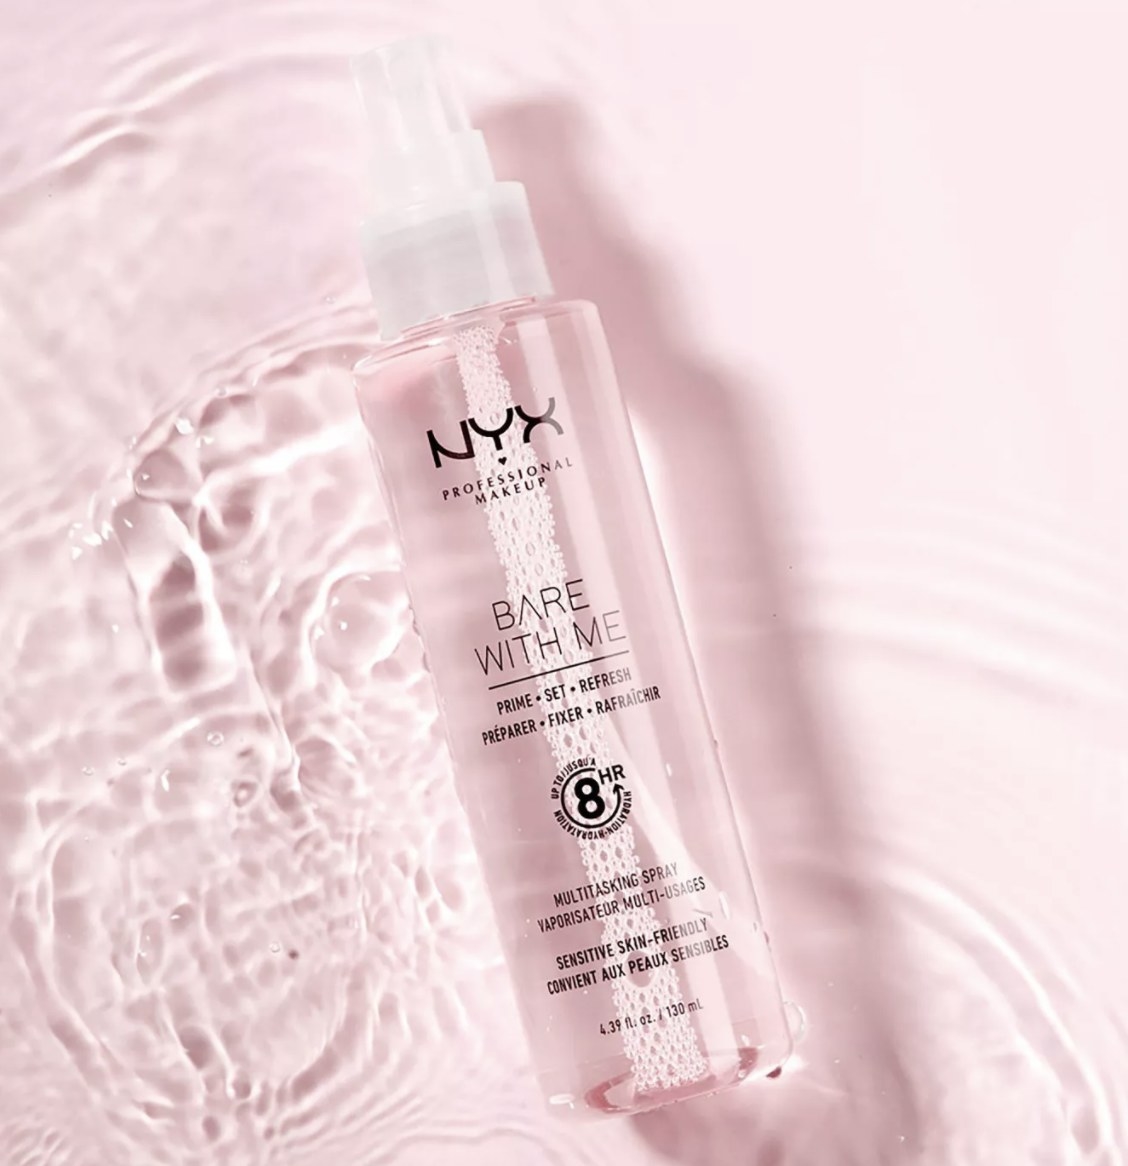 The light pink bottle says &quot;NYX PROFESSIONAL MAKEUP&quot; and &quot;BARE WITH ME&quot; and is laid against liquid on a light pink background